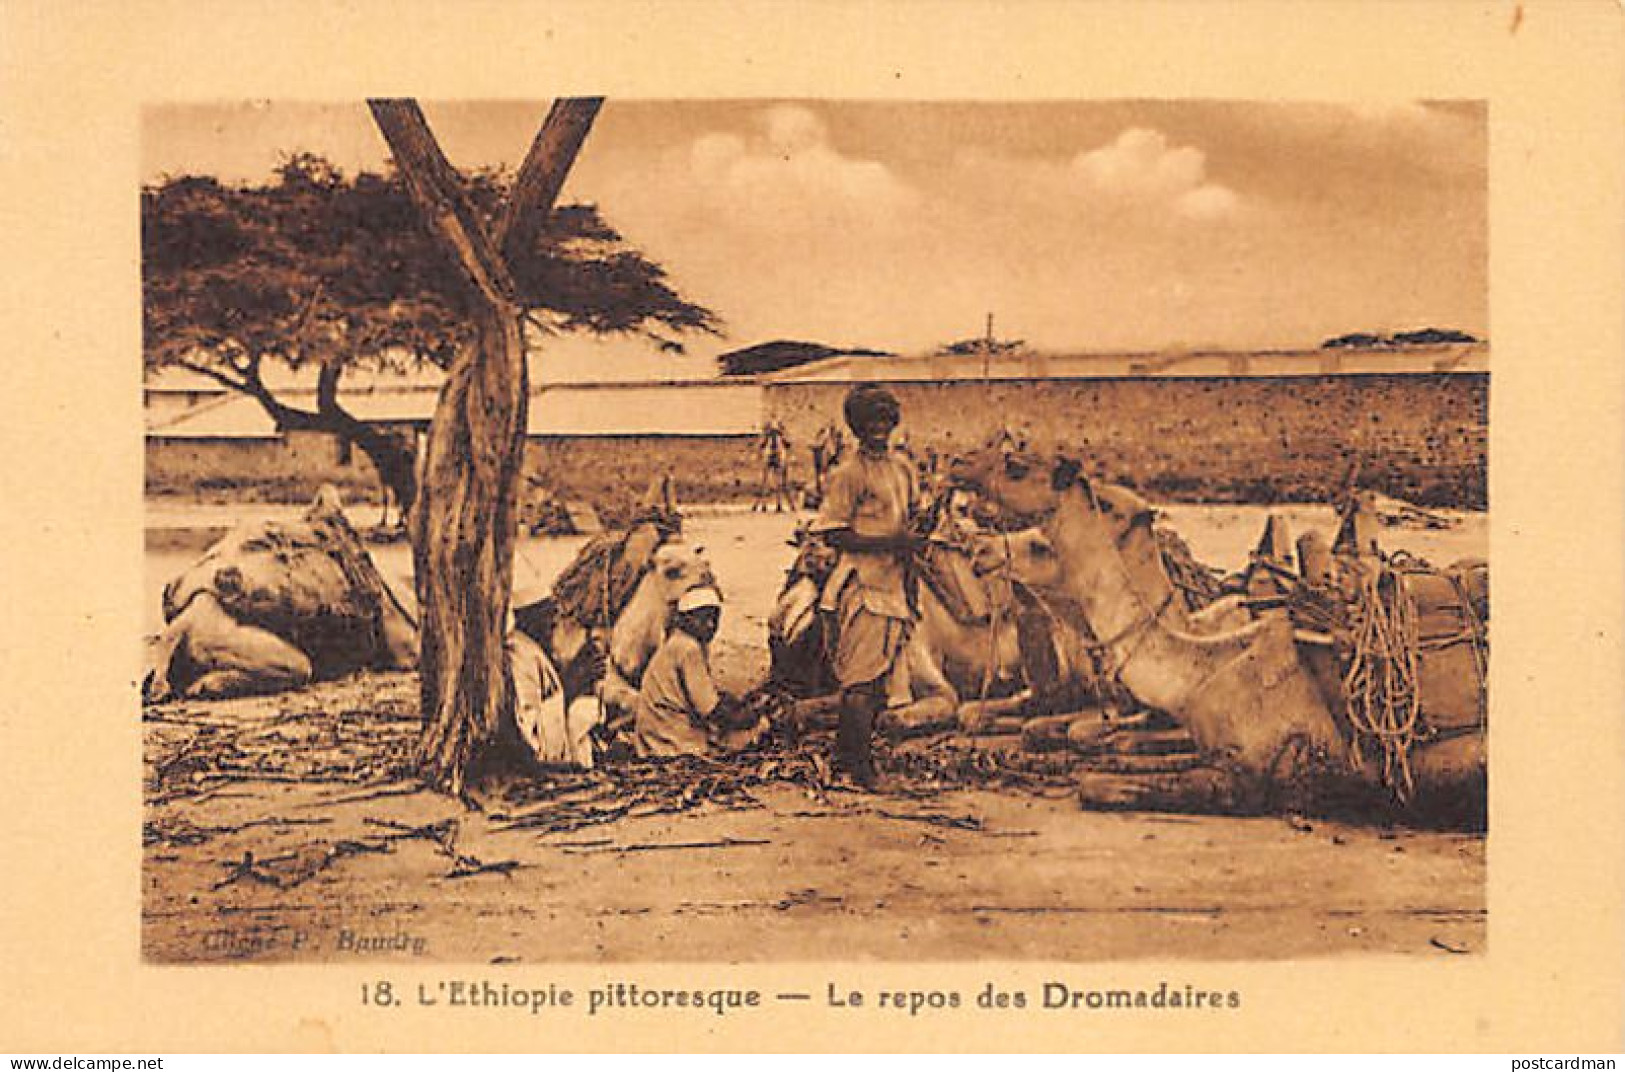 Ethiopia - DIRE DAWA - The Rest Of The Camels - Publ. Printing Works Of The Dire Dawa Catholic Mission - Photographer P. - Ethiopie